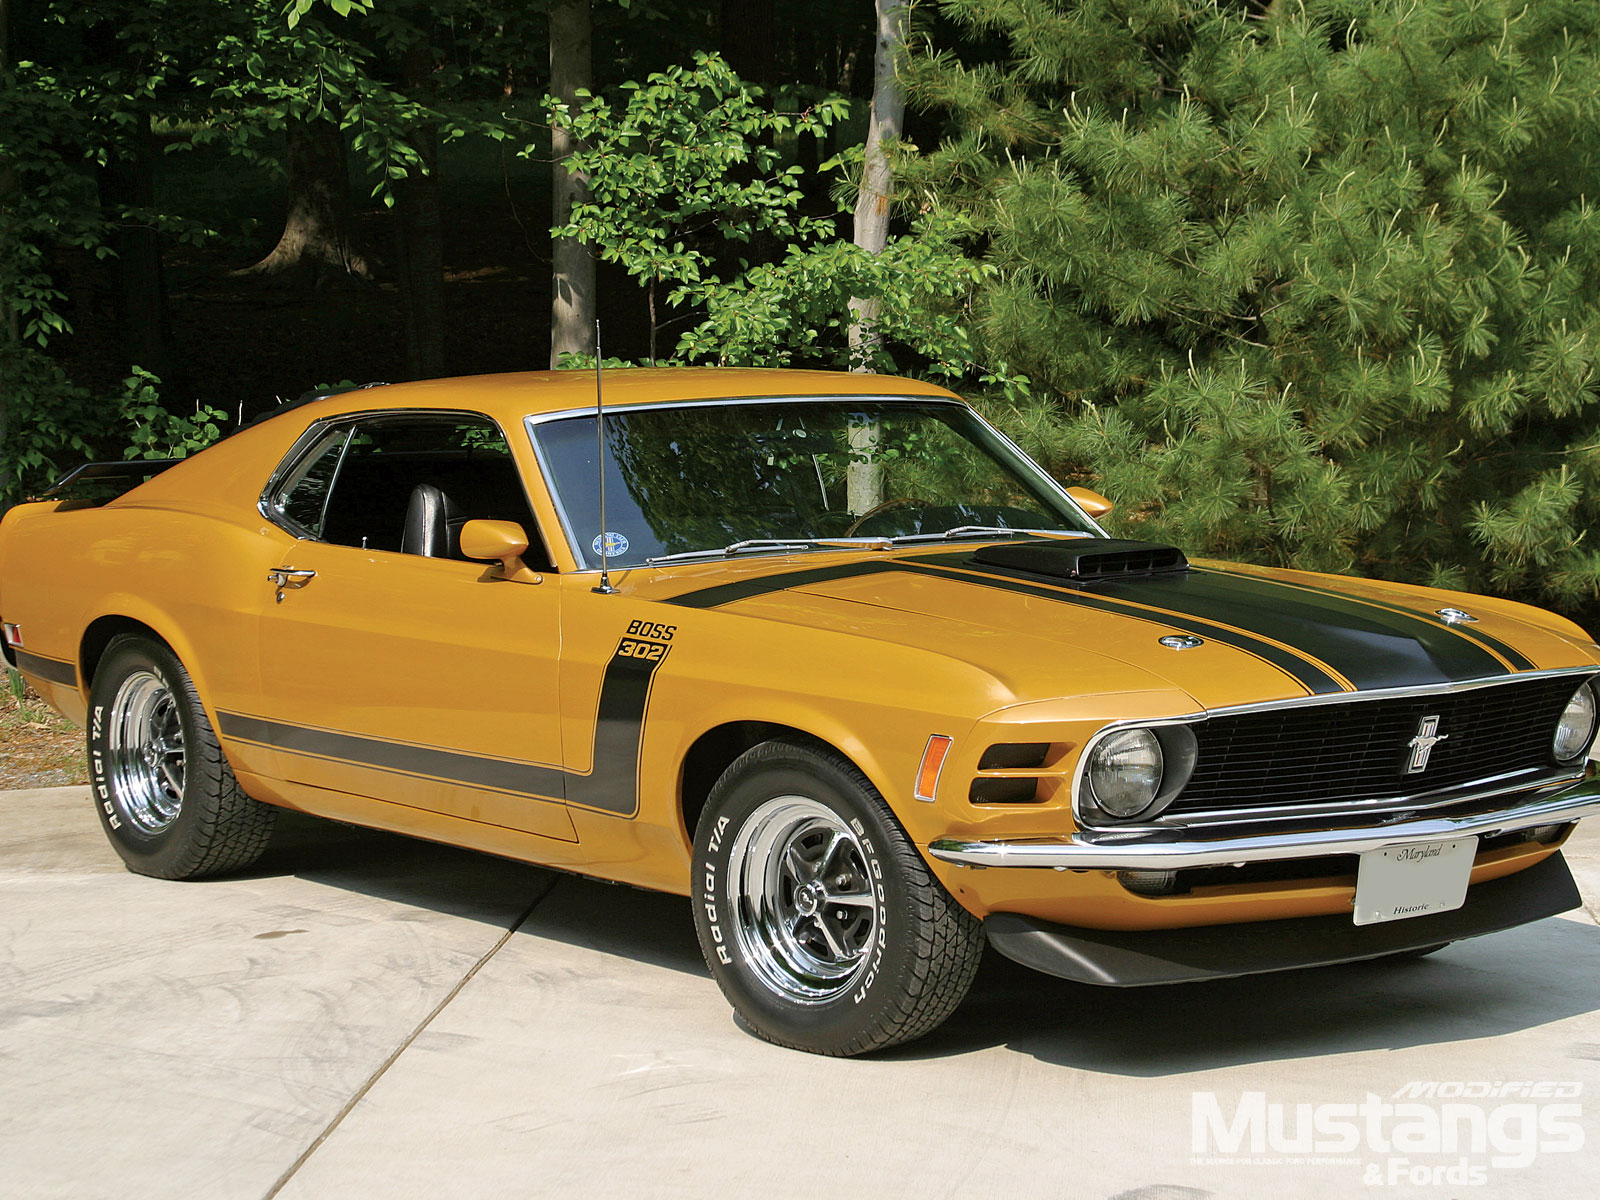 Ford Mustang Boss 429 1970 - image #109